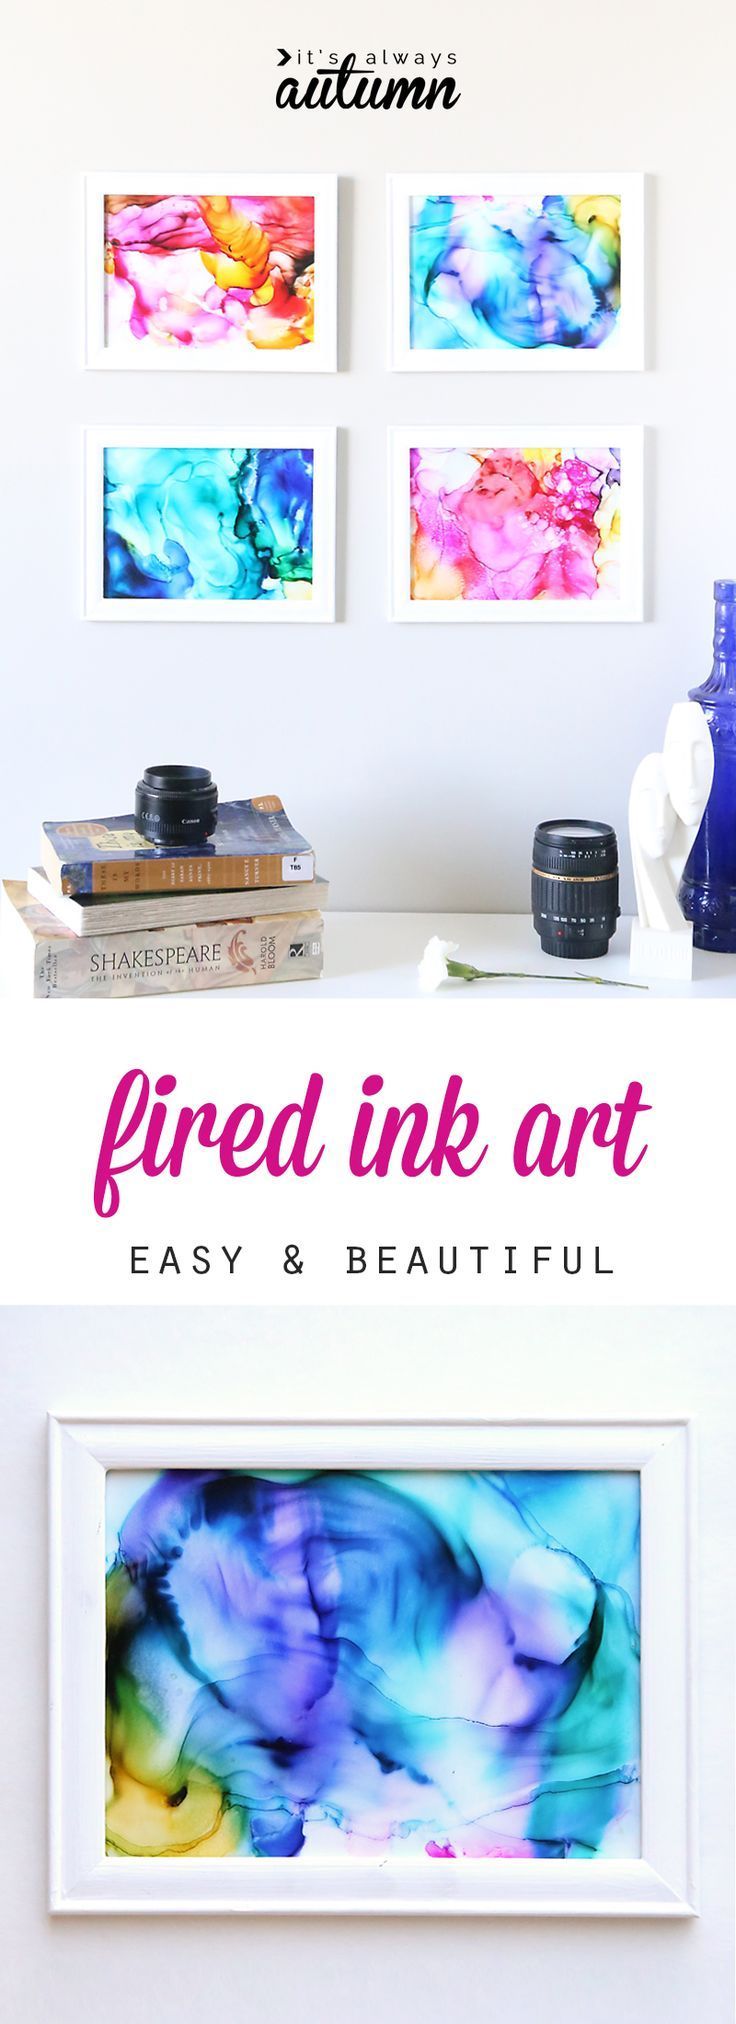 This fired ink art is so cool! It’s easy enough for kids to do and turns out beautiful! Great summer craft activity to do with